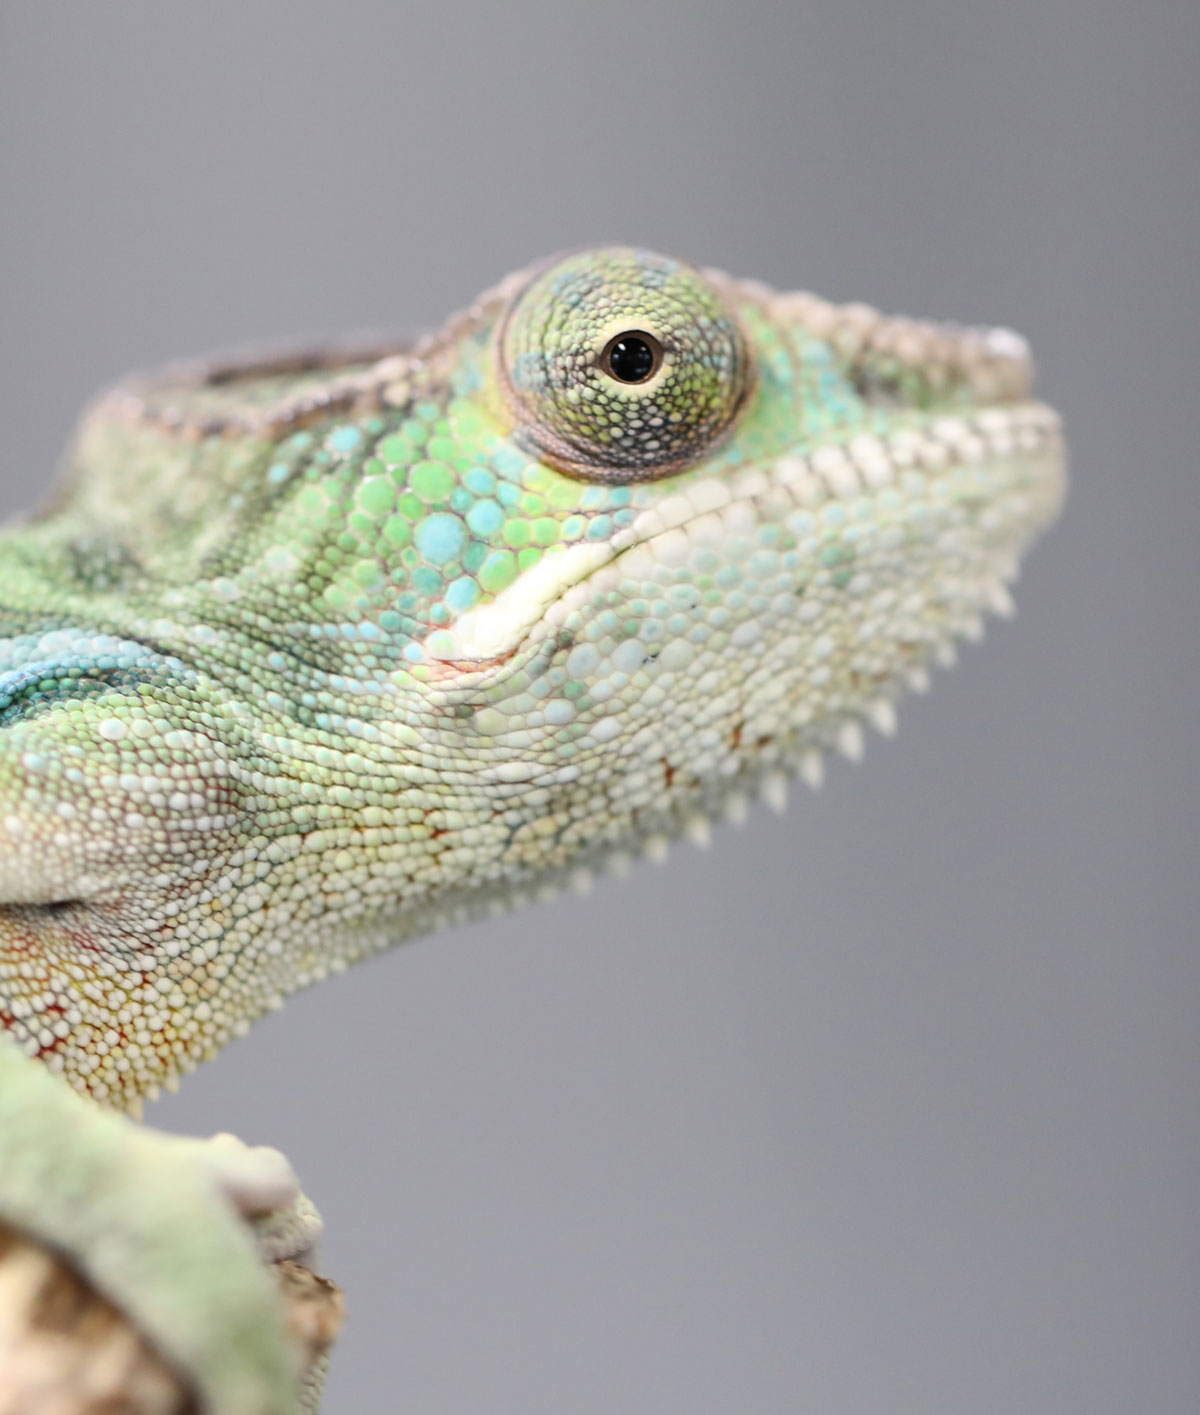 Male Panther Chameleon For Sale